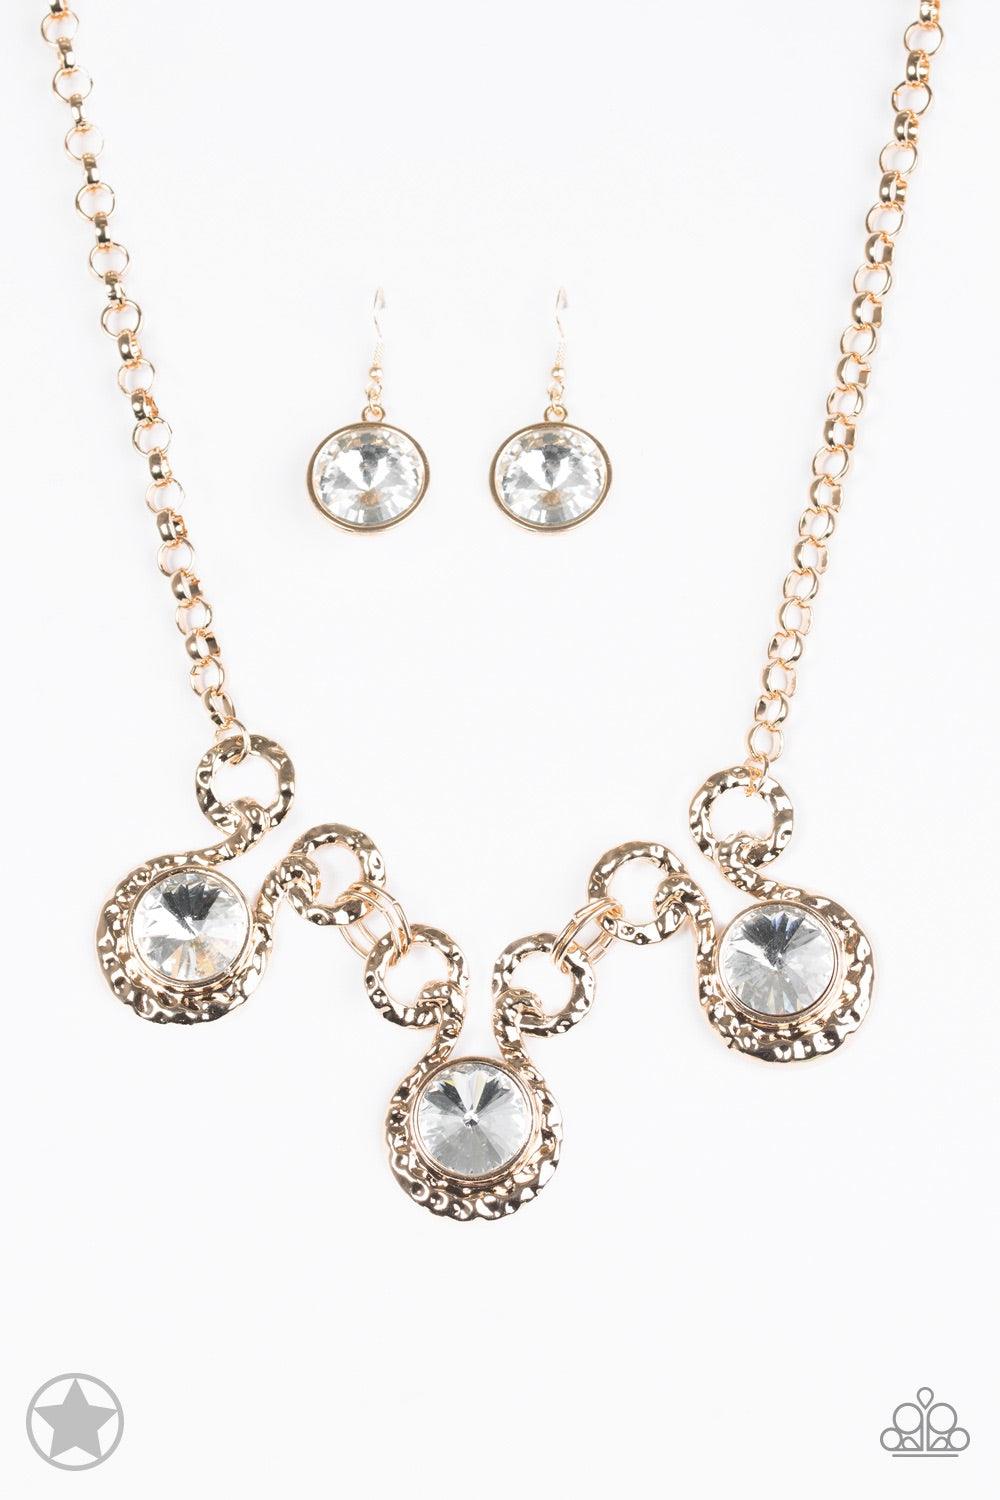 Paparazzi Accessories Hypnotized - Gold Three dramatically oversized rhinestones are nestled into three textured gold fittings that are connected by oval gold rings, creating a brilliant statement piece. Features an adjustable clasp closure. Jewelry